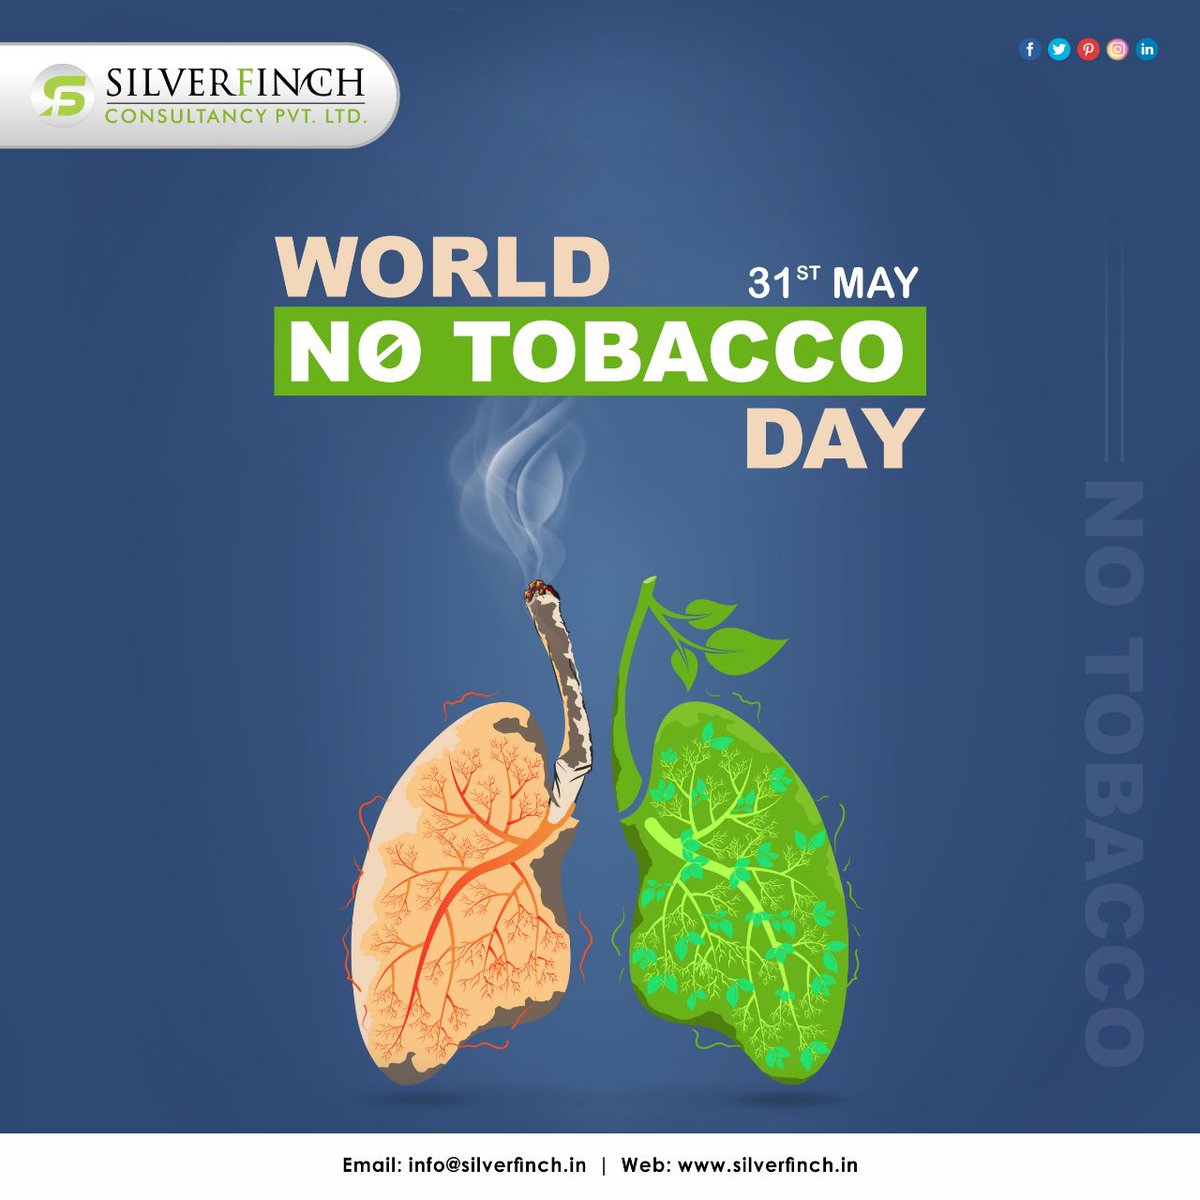 Breathe Free, Live Healthy: Join us in Observing No Tobacco Day and Say No to Smoking! 🚭💚
#silverfinch #silverfinchconsultancy #NoTobaccoDay #QuitSmoking #TobaccoFree #SmokeFree #HealthyLungs
#TobaccoControl #KickTheHabit #ChooseLife #BreatheFree #SayNoToSmoking